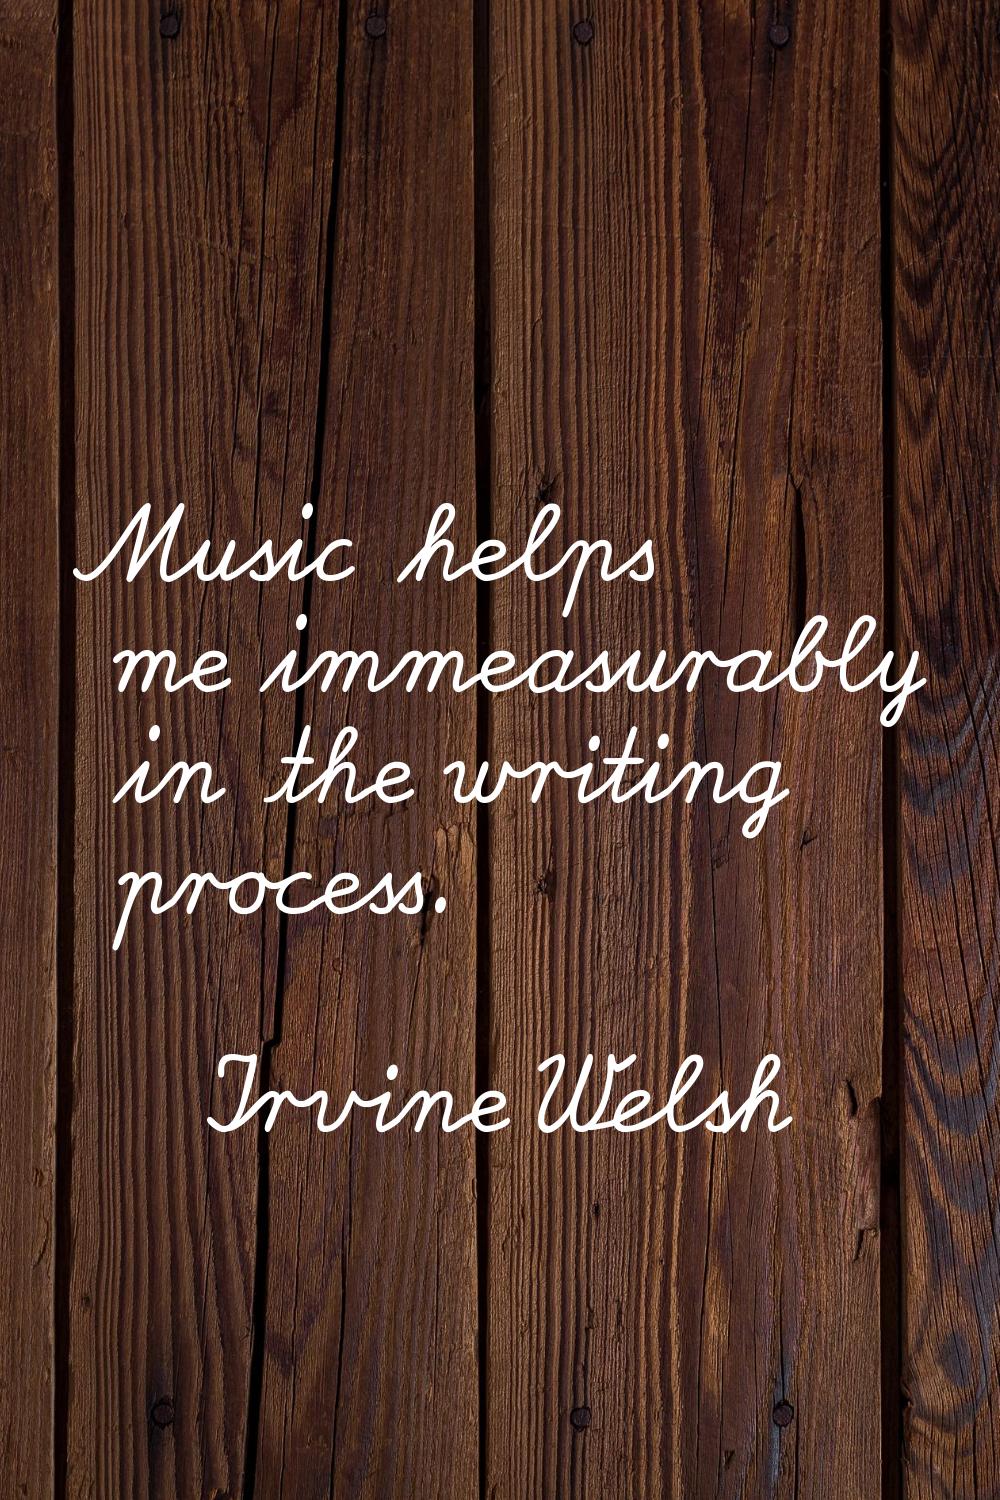 Music helps me immeasurably in the writing process.